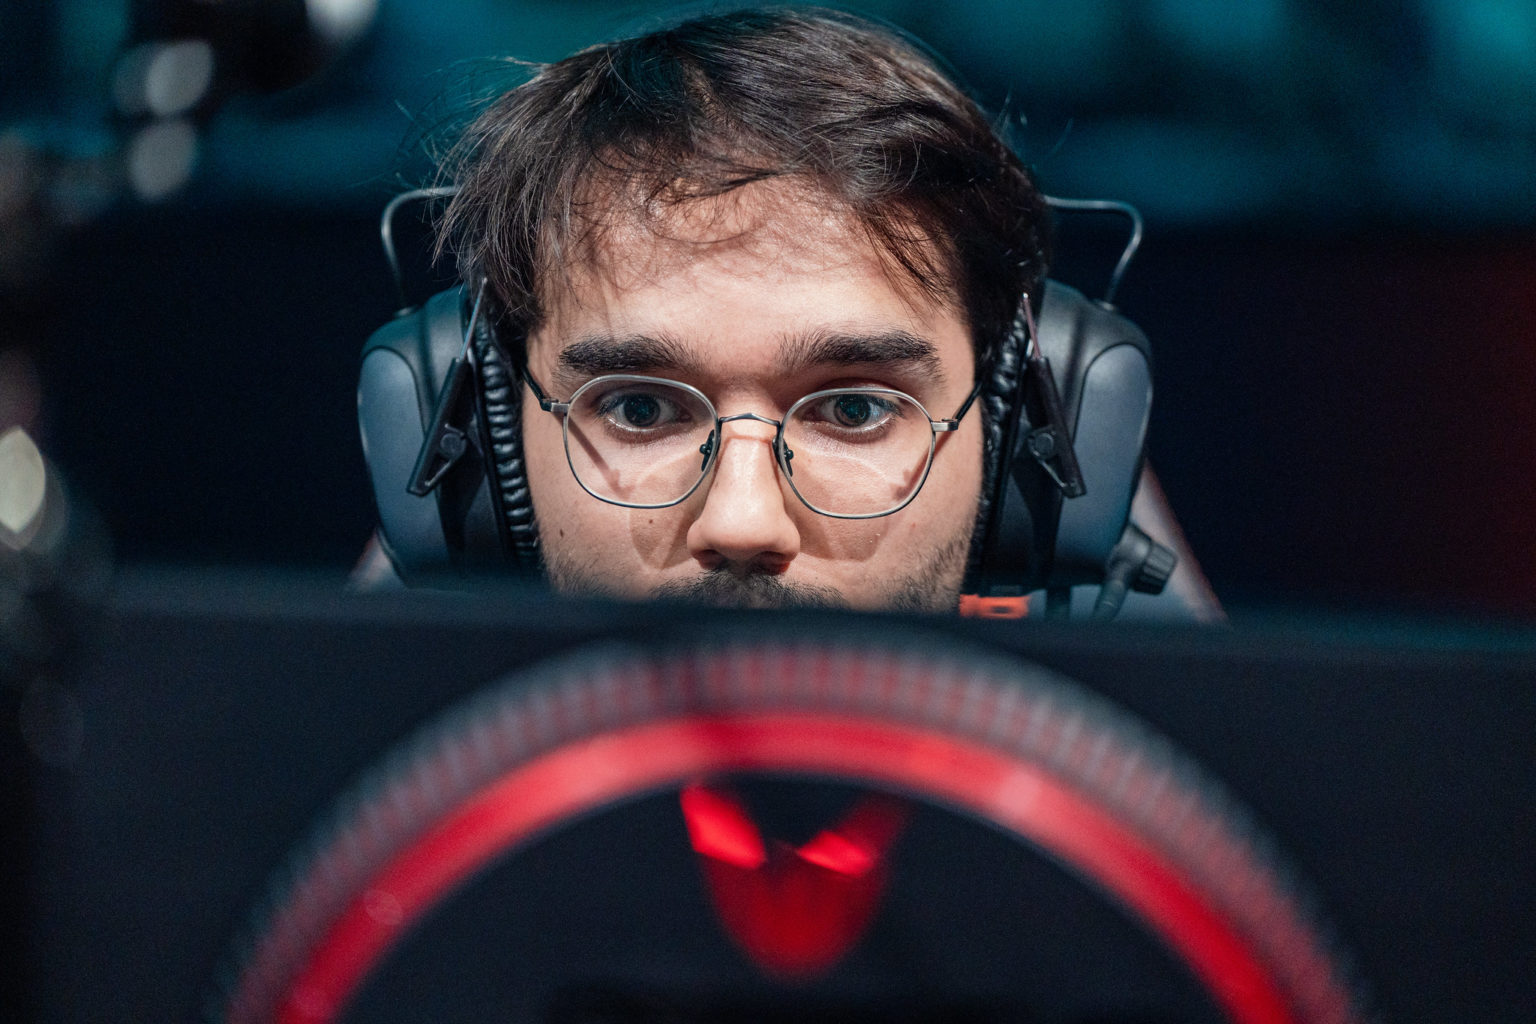 The final piece: Hylissang joins MAD Lions ahead of LEC 2023 season